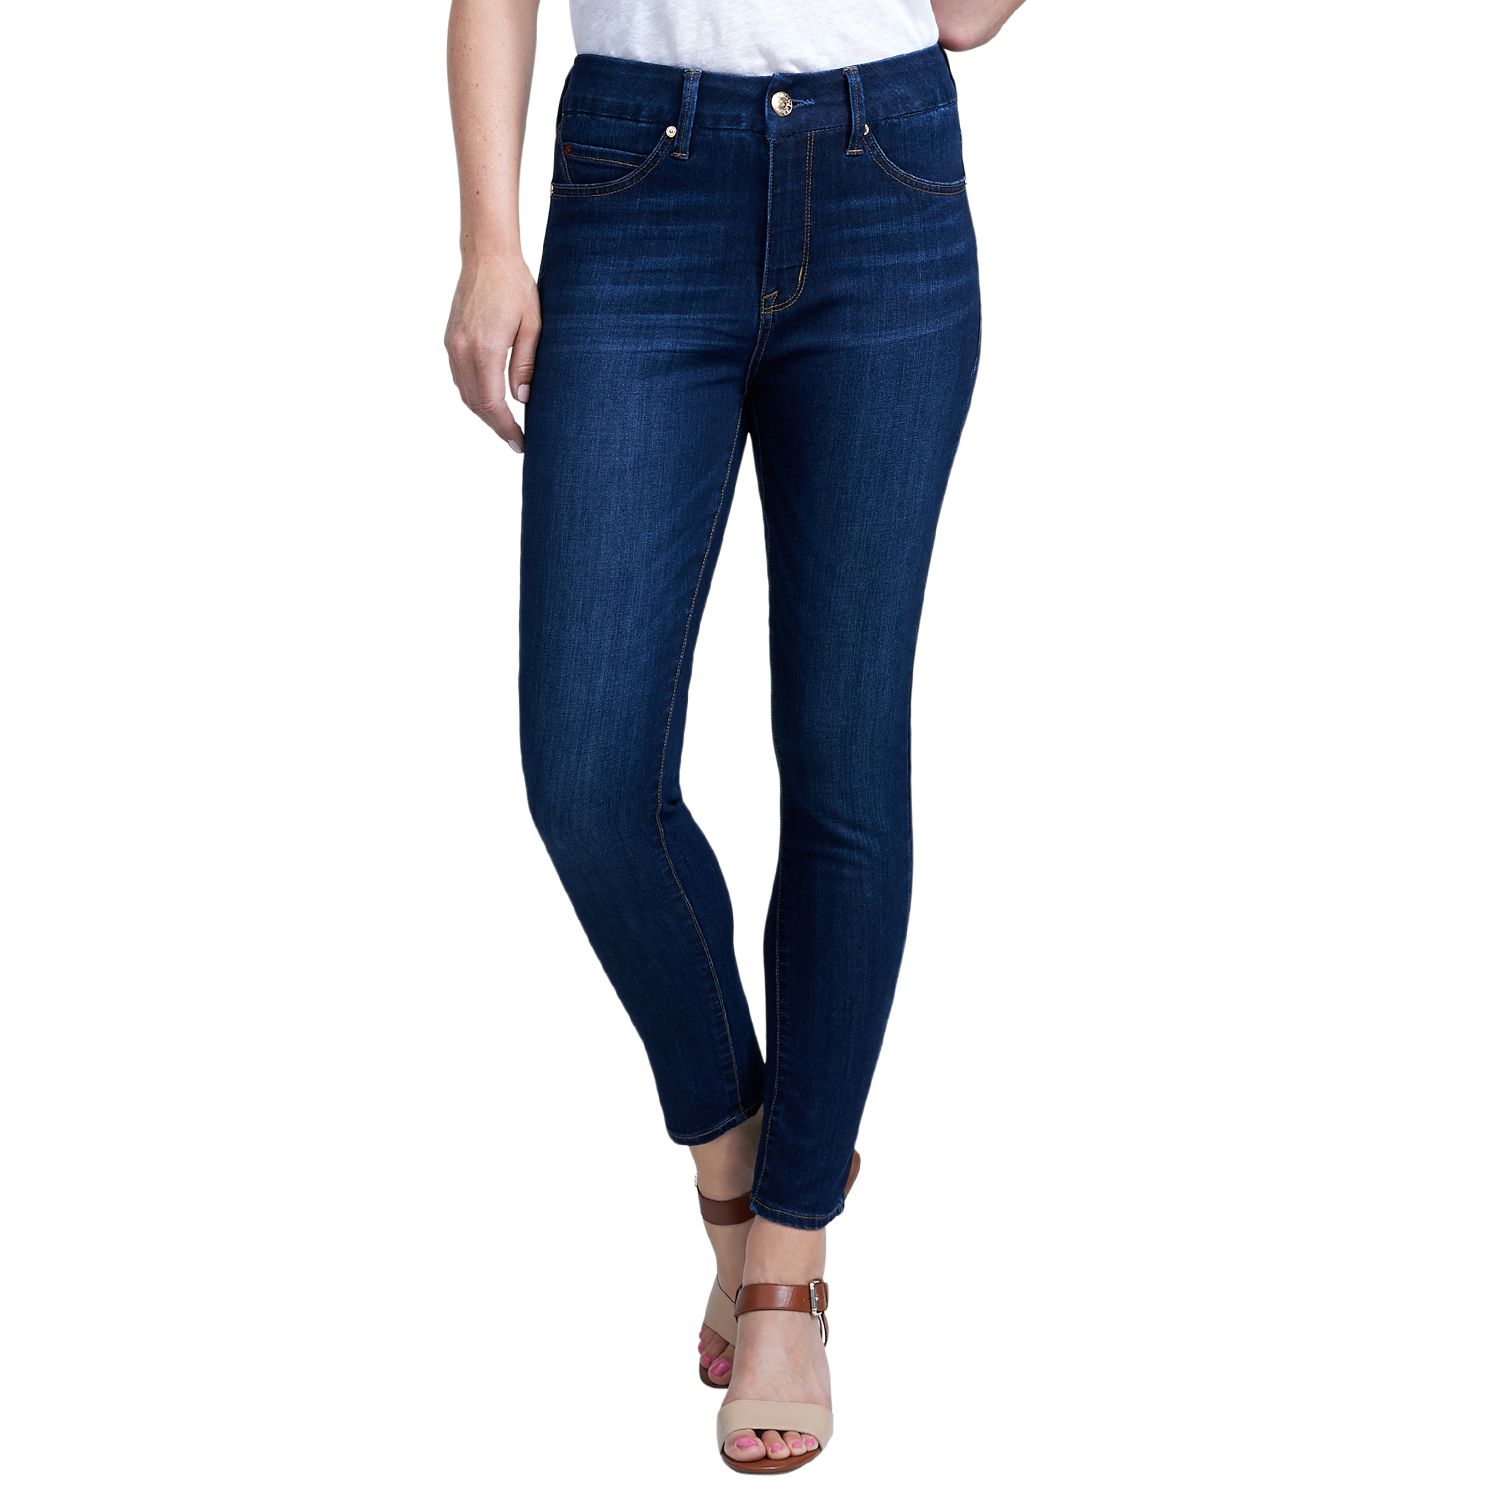 seven7 high rise ankle skinny jeans